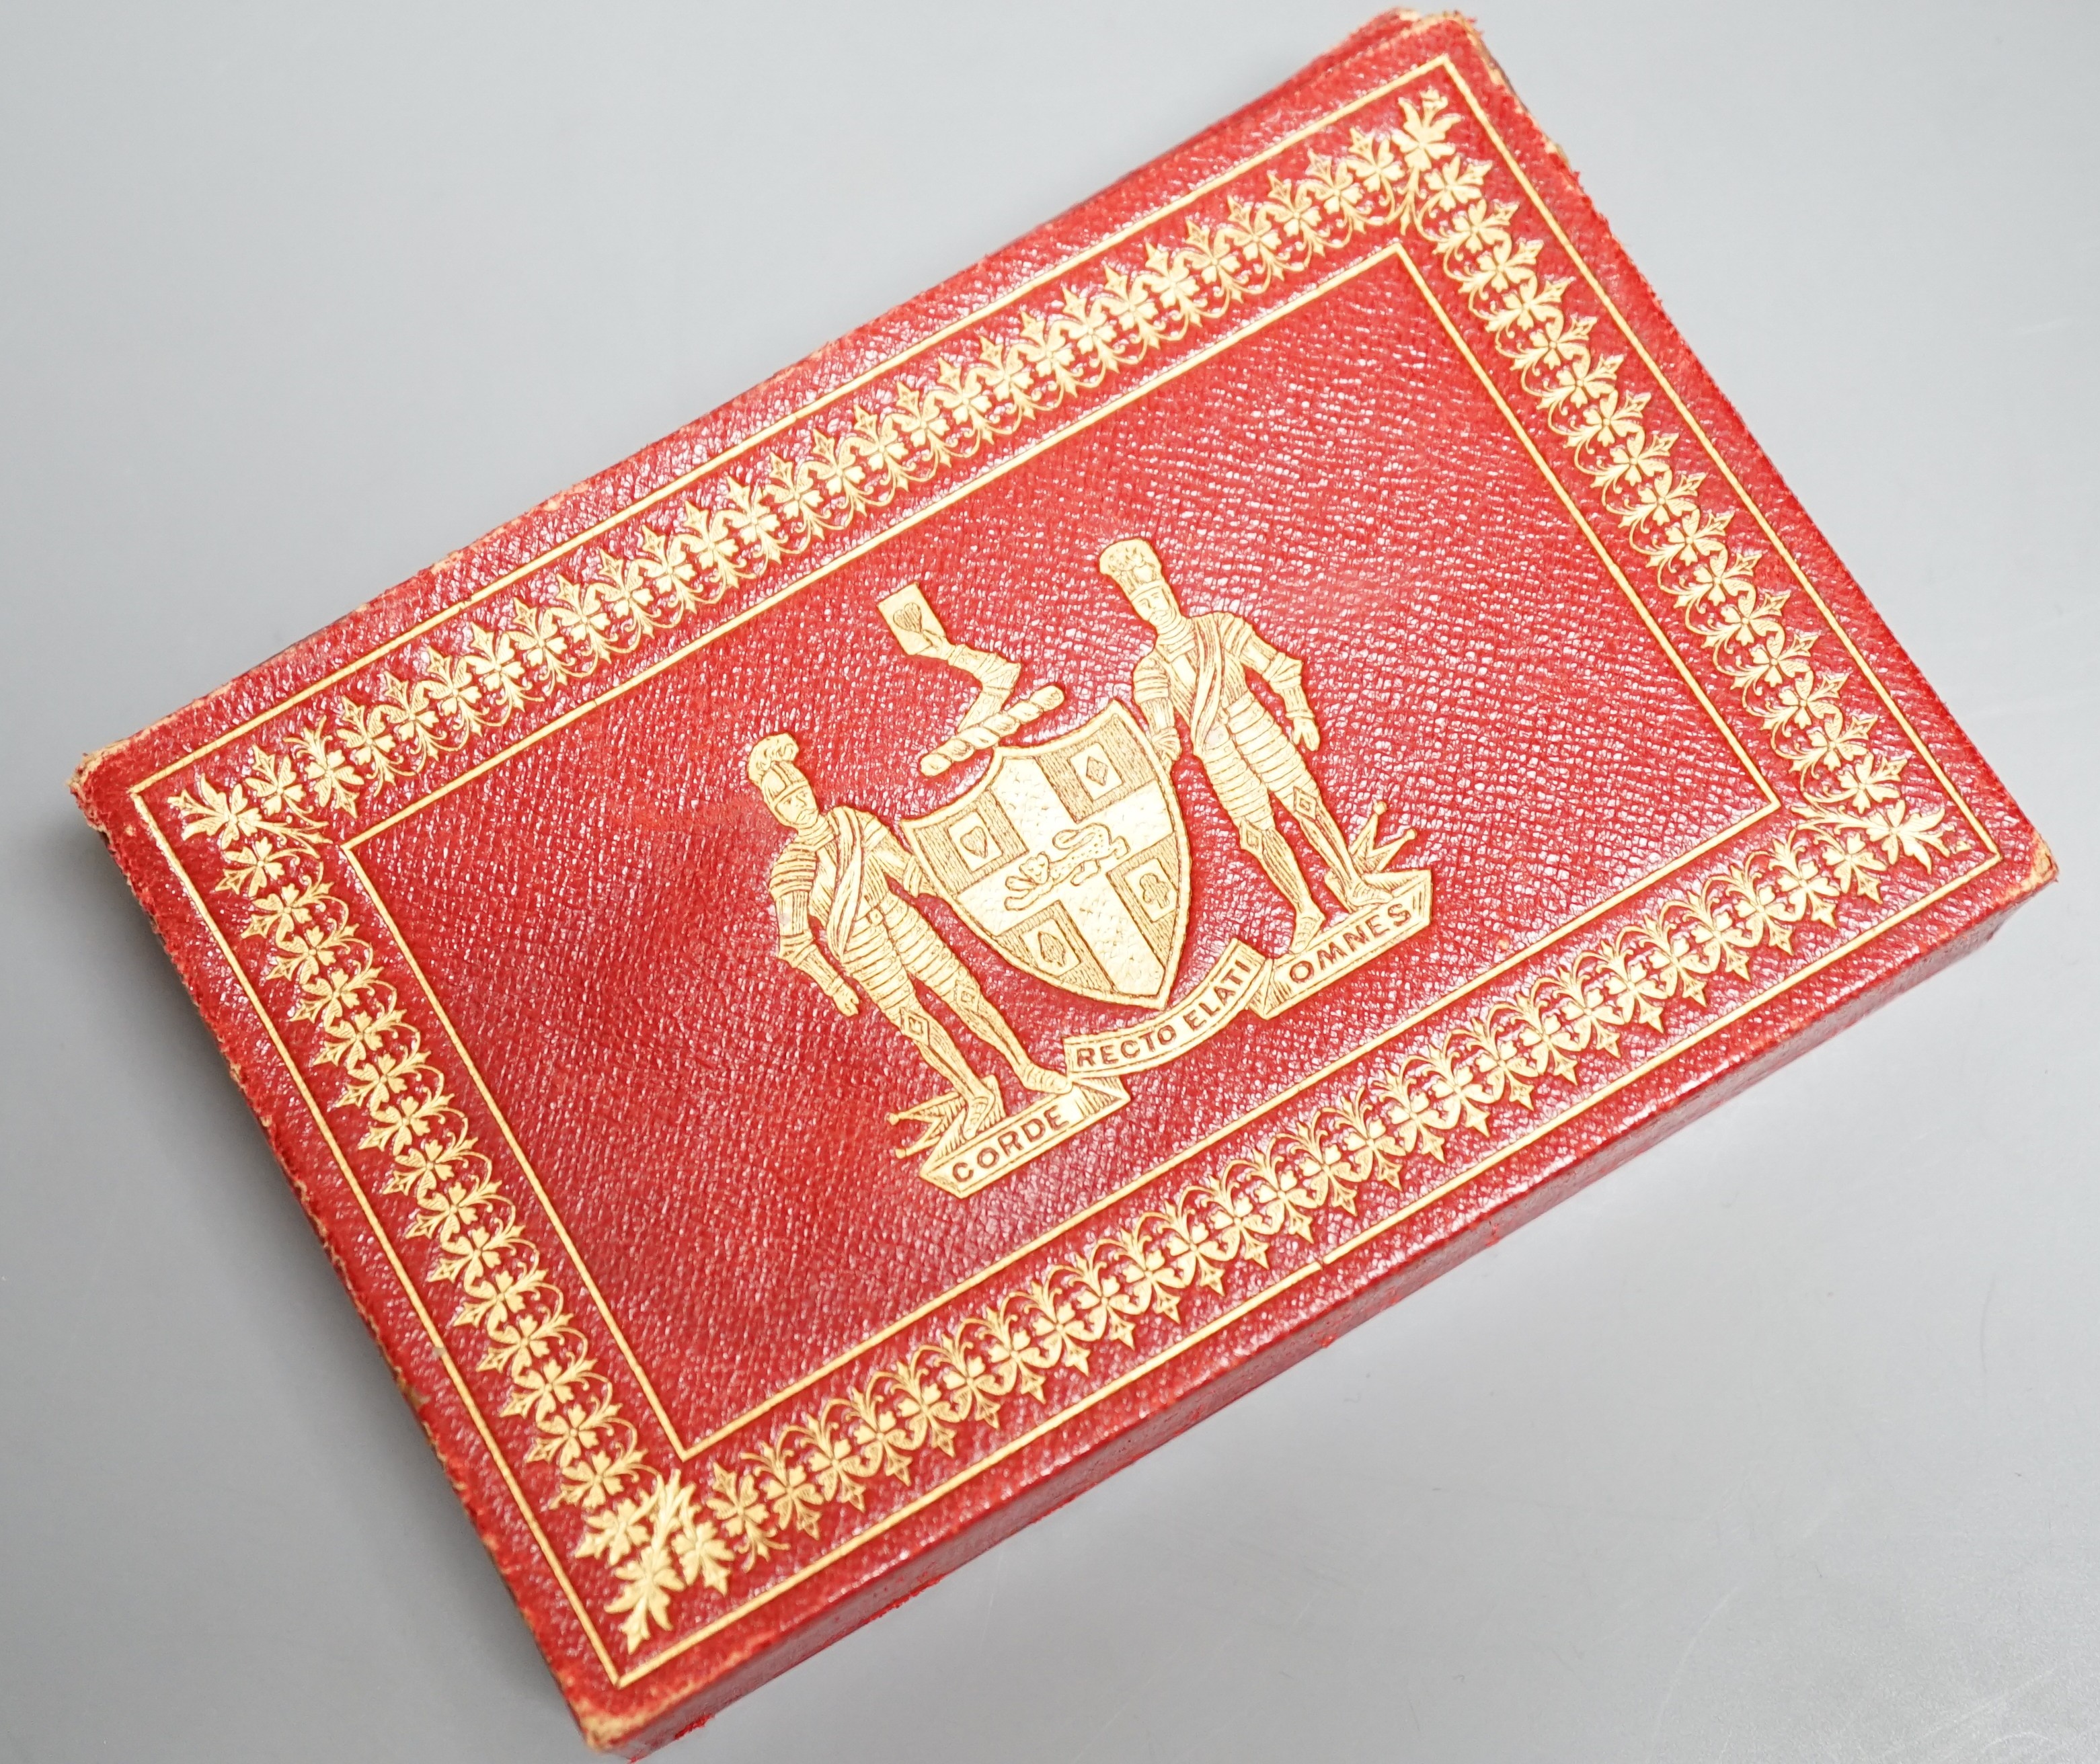 Two packs of Edwardian Royal commemorative playing cards with red morocco leather case, gilt decorated with an armorial